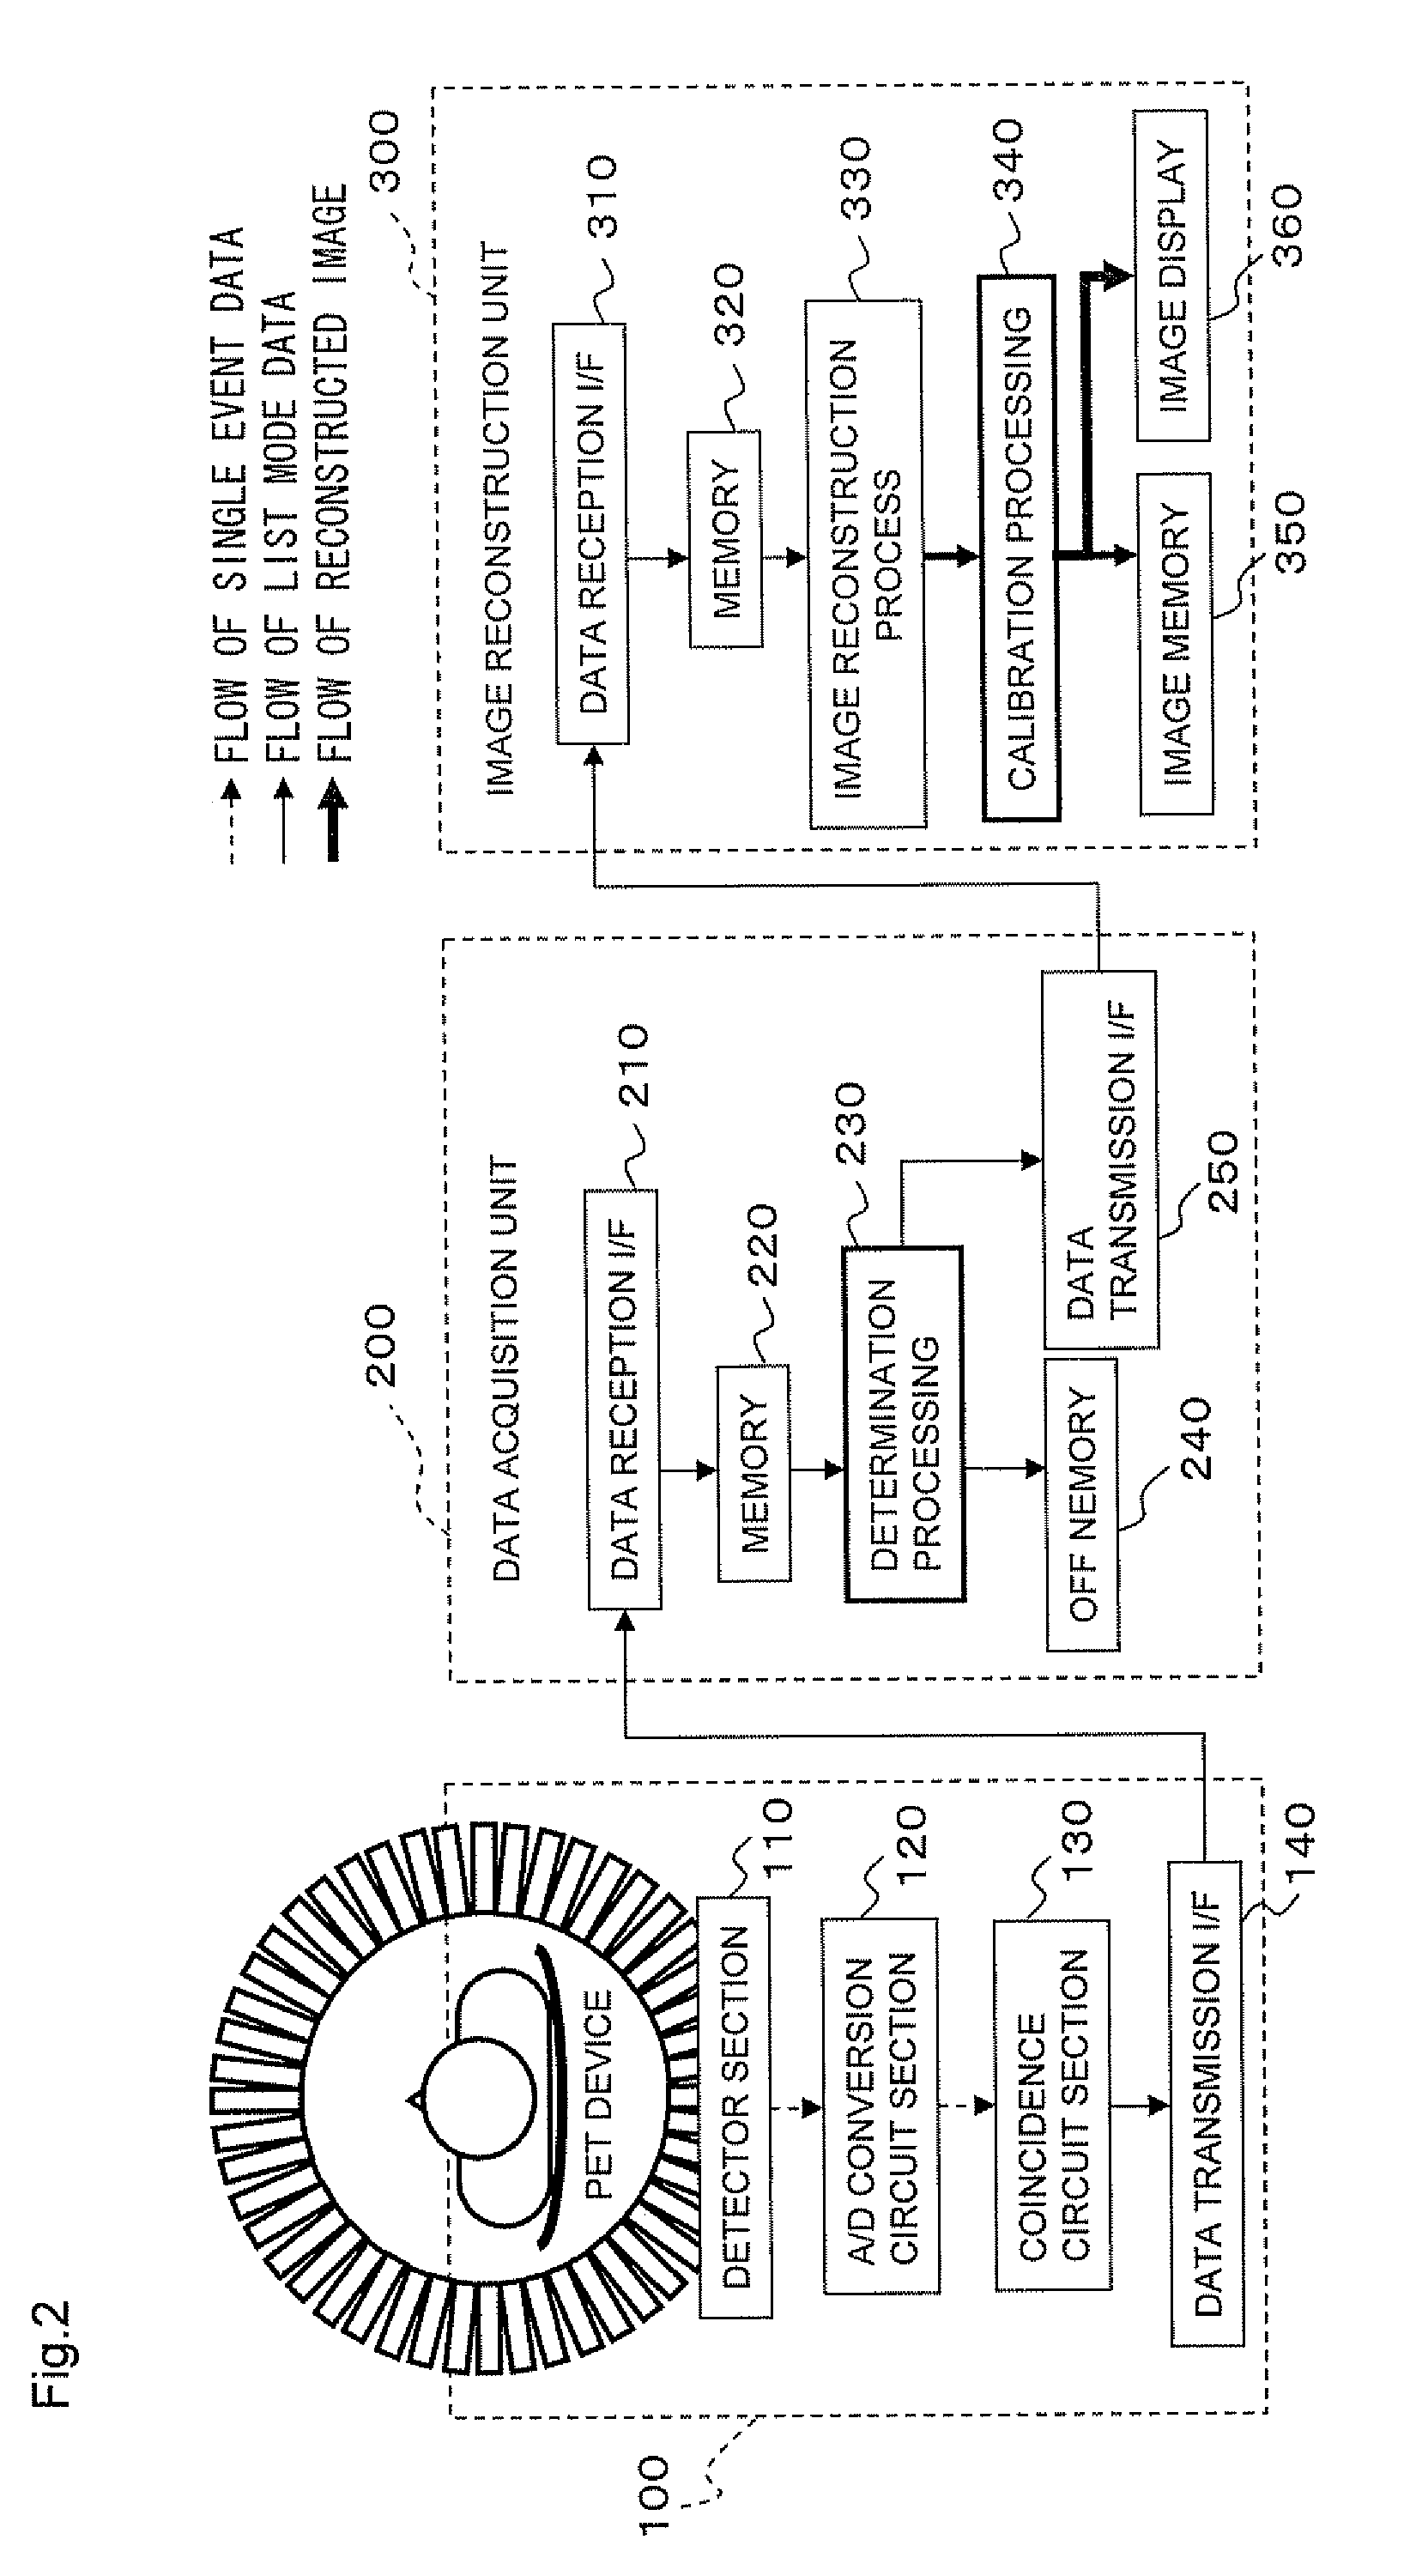 Method and system for imaging using nuclear medicine imaging apparatus, nuclear medicine imaging system, and radiation therapy control system